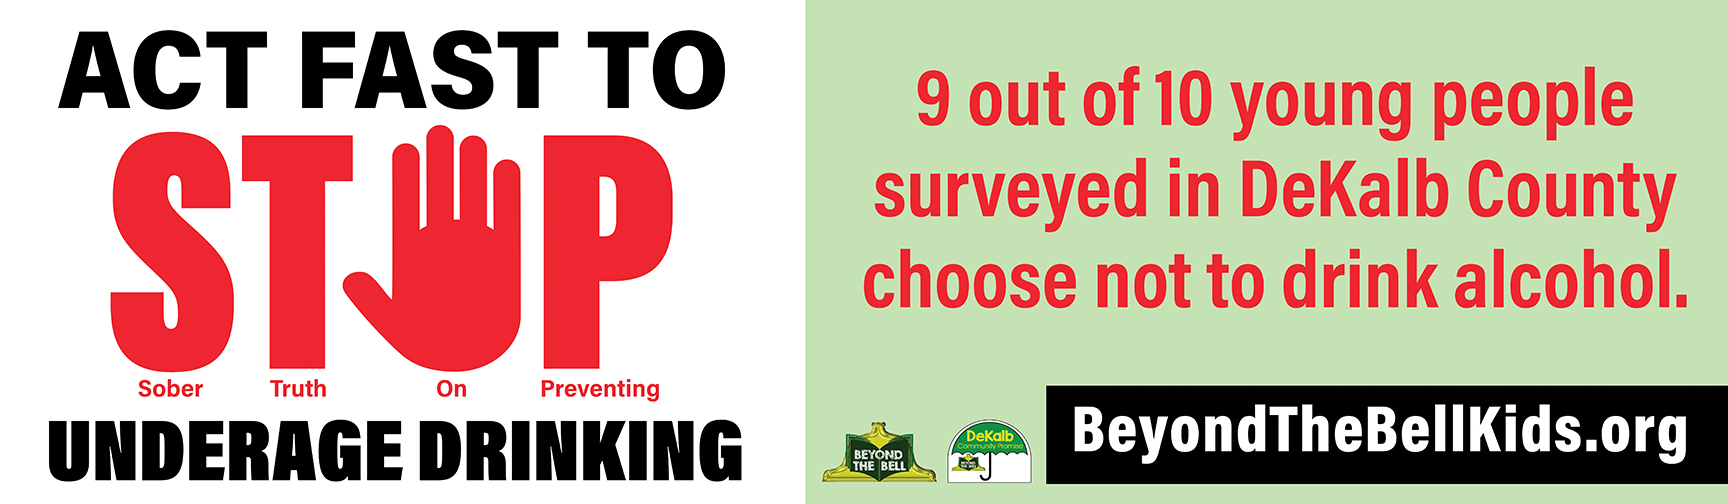 Act fast to stop underage drinking. 9 out of 10 young people surveyed in DeKalb County choose not to drink alcohol.